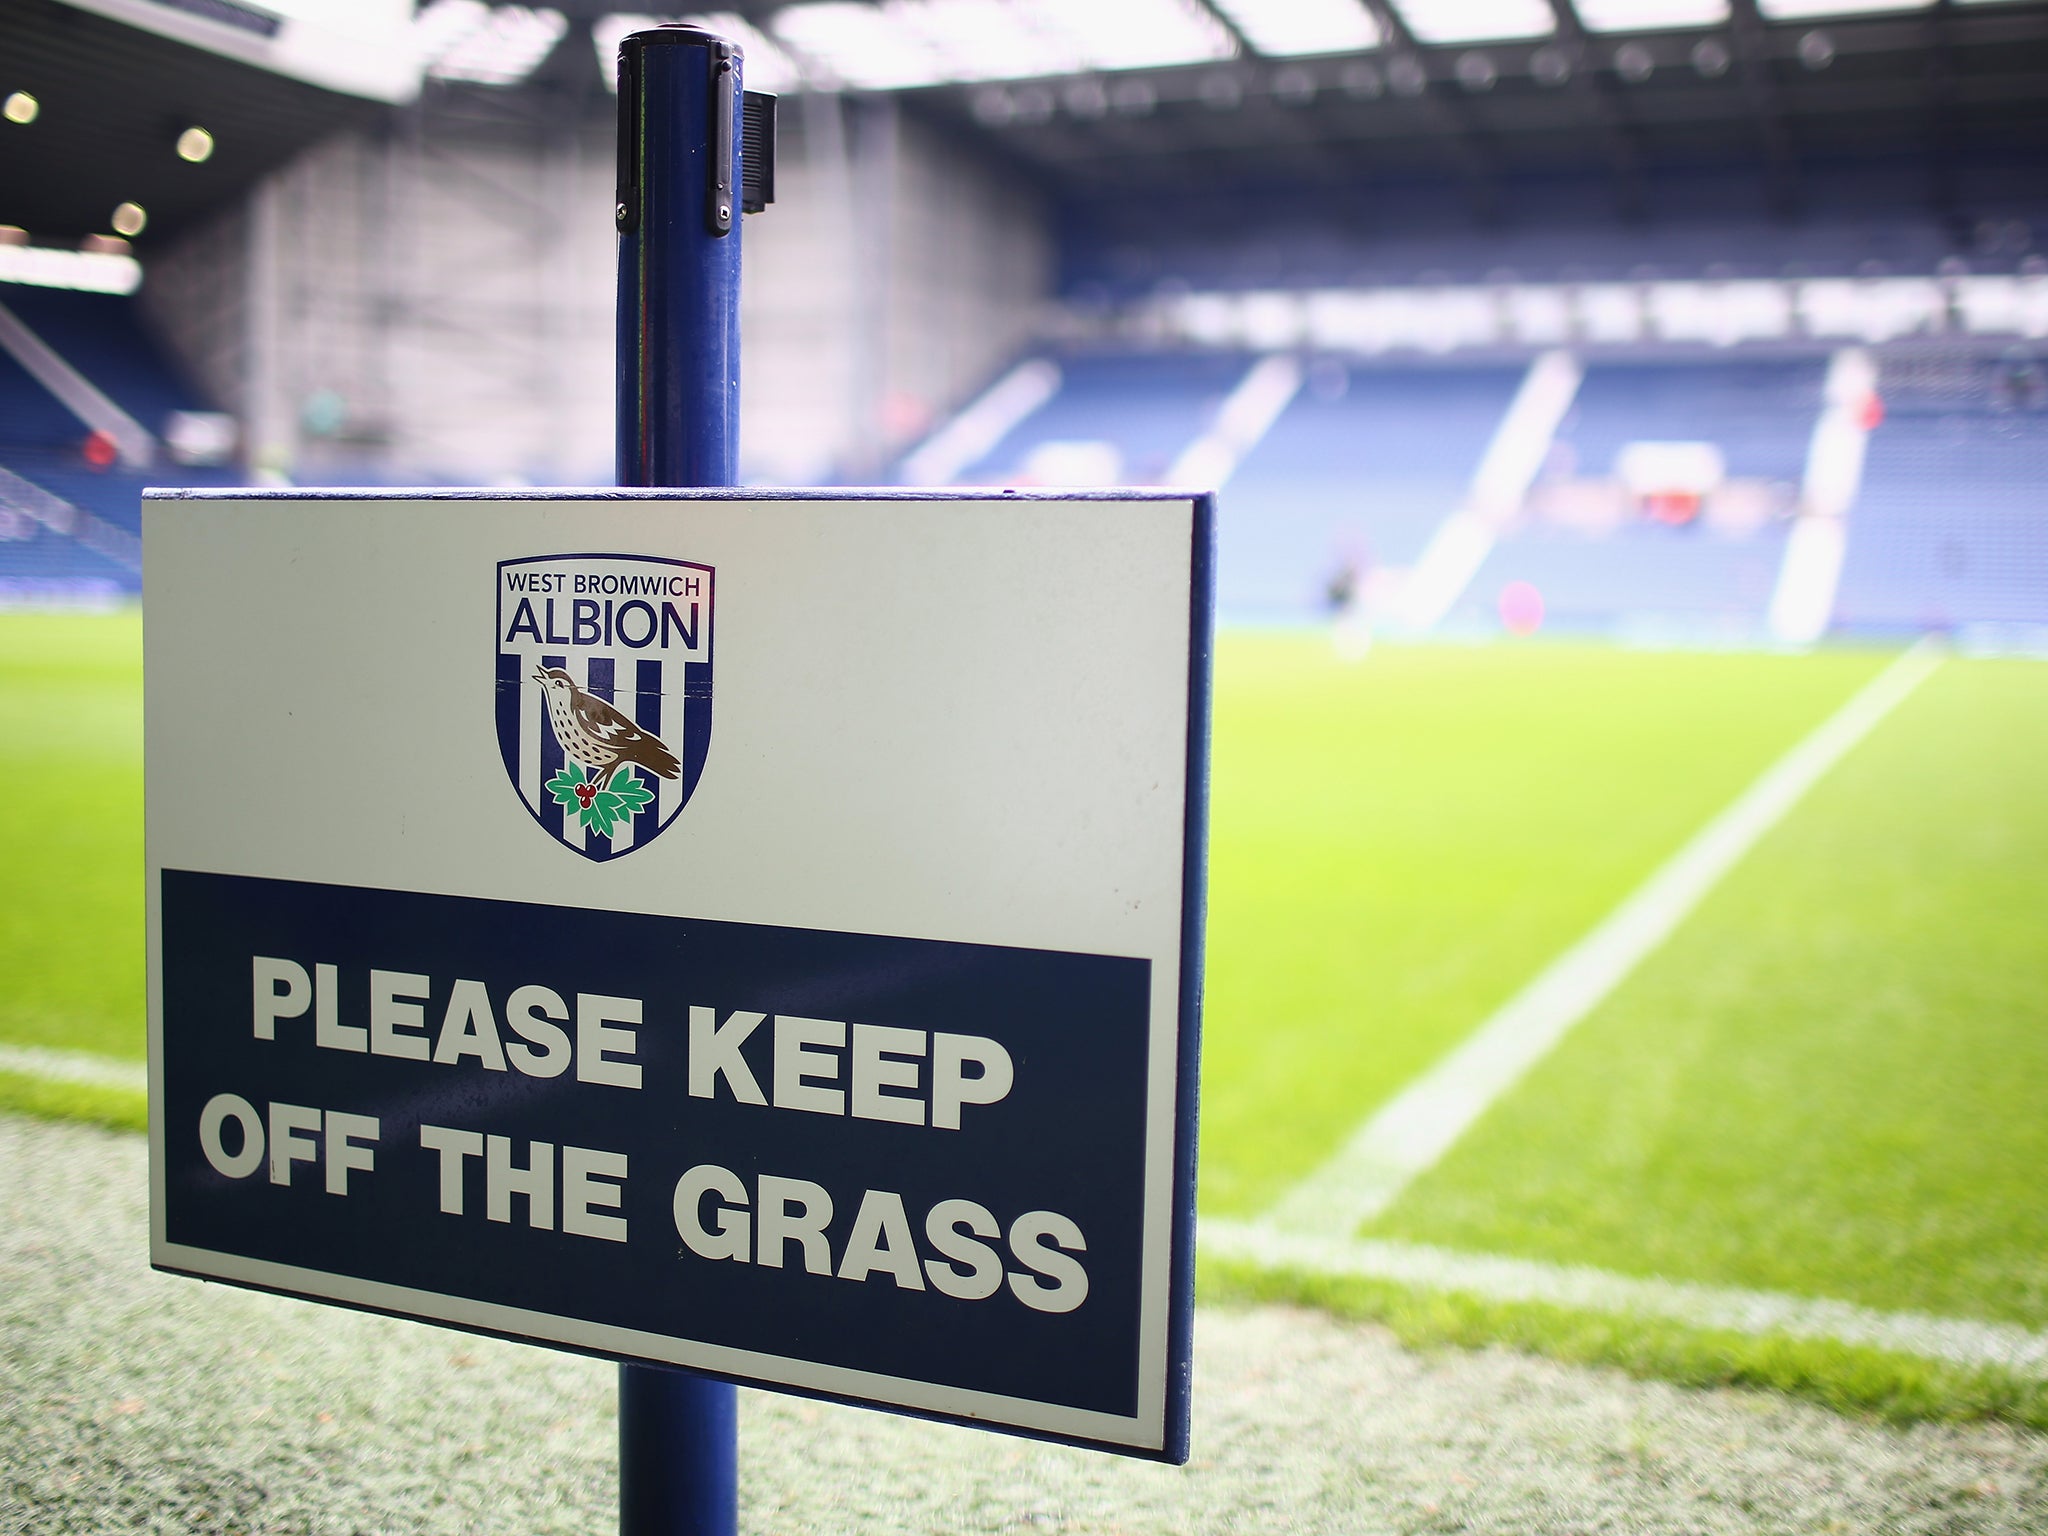 A view of the Hawthorns, the home of West Brom